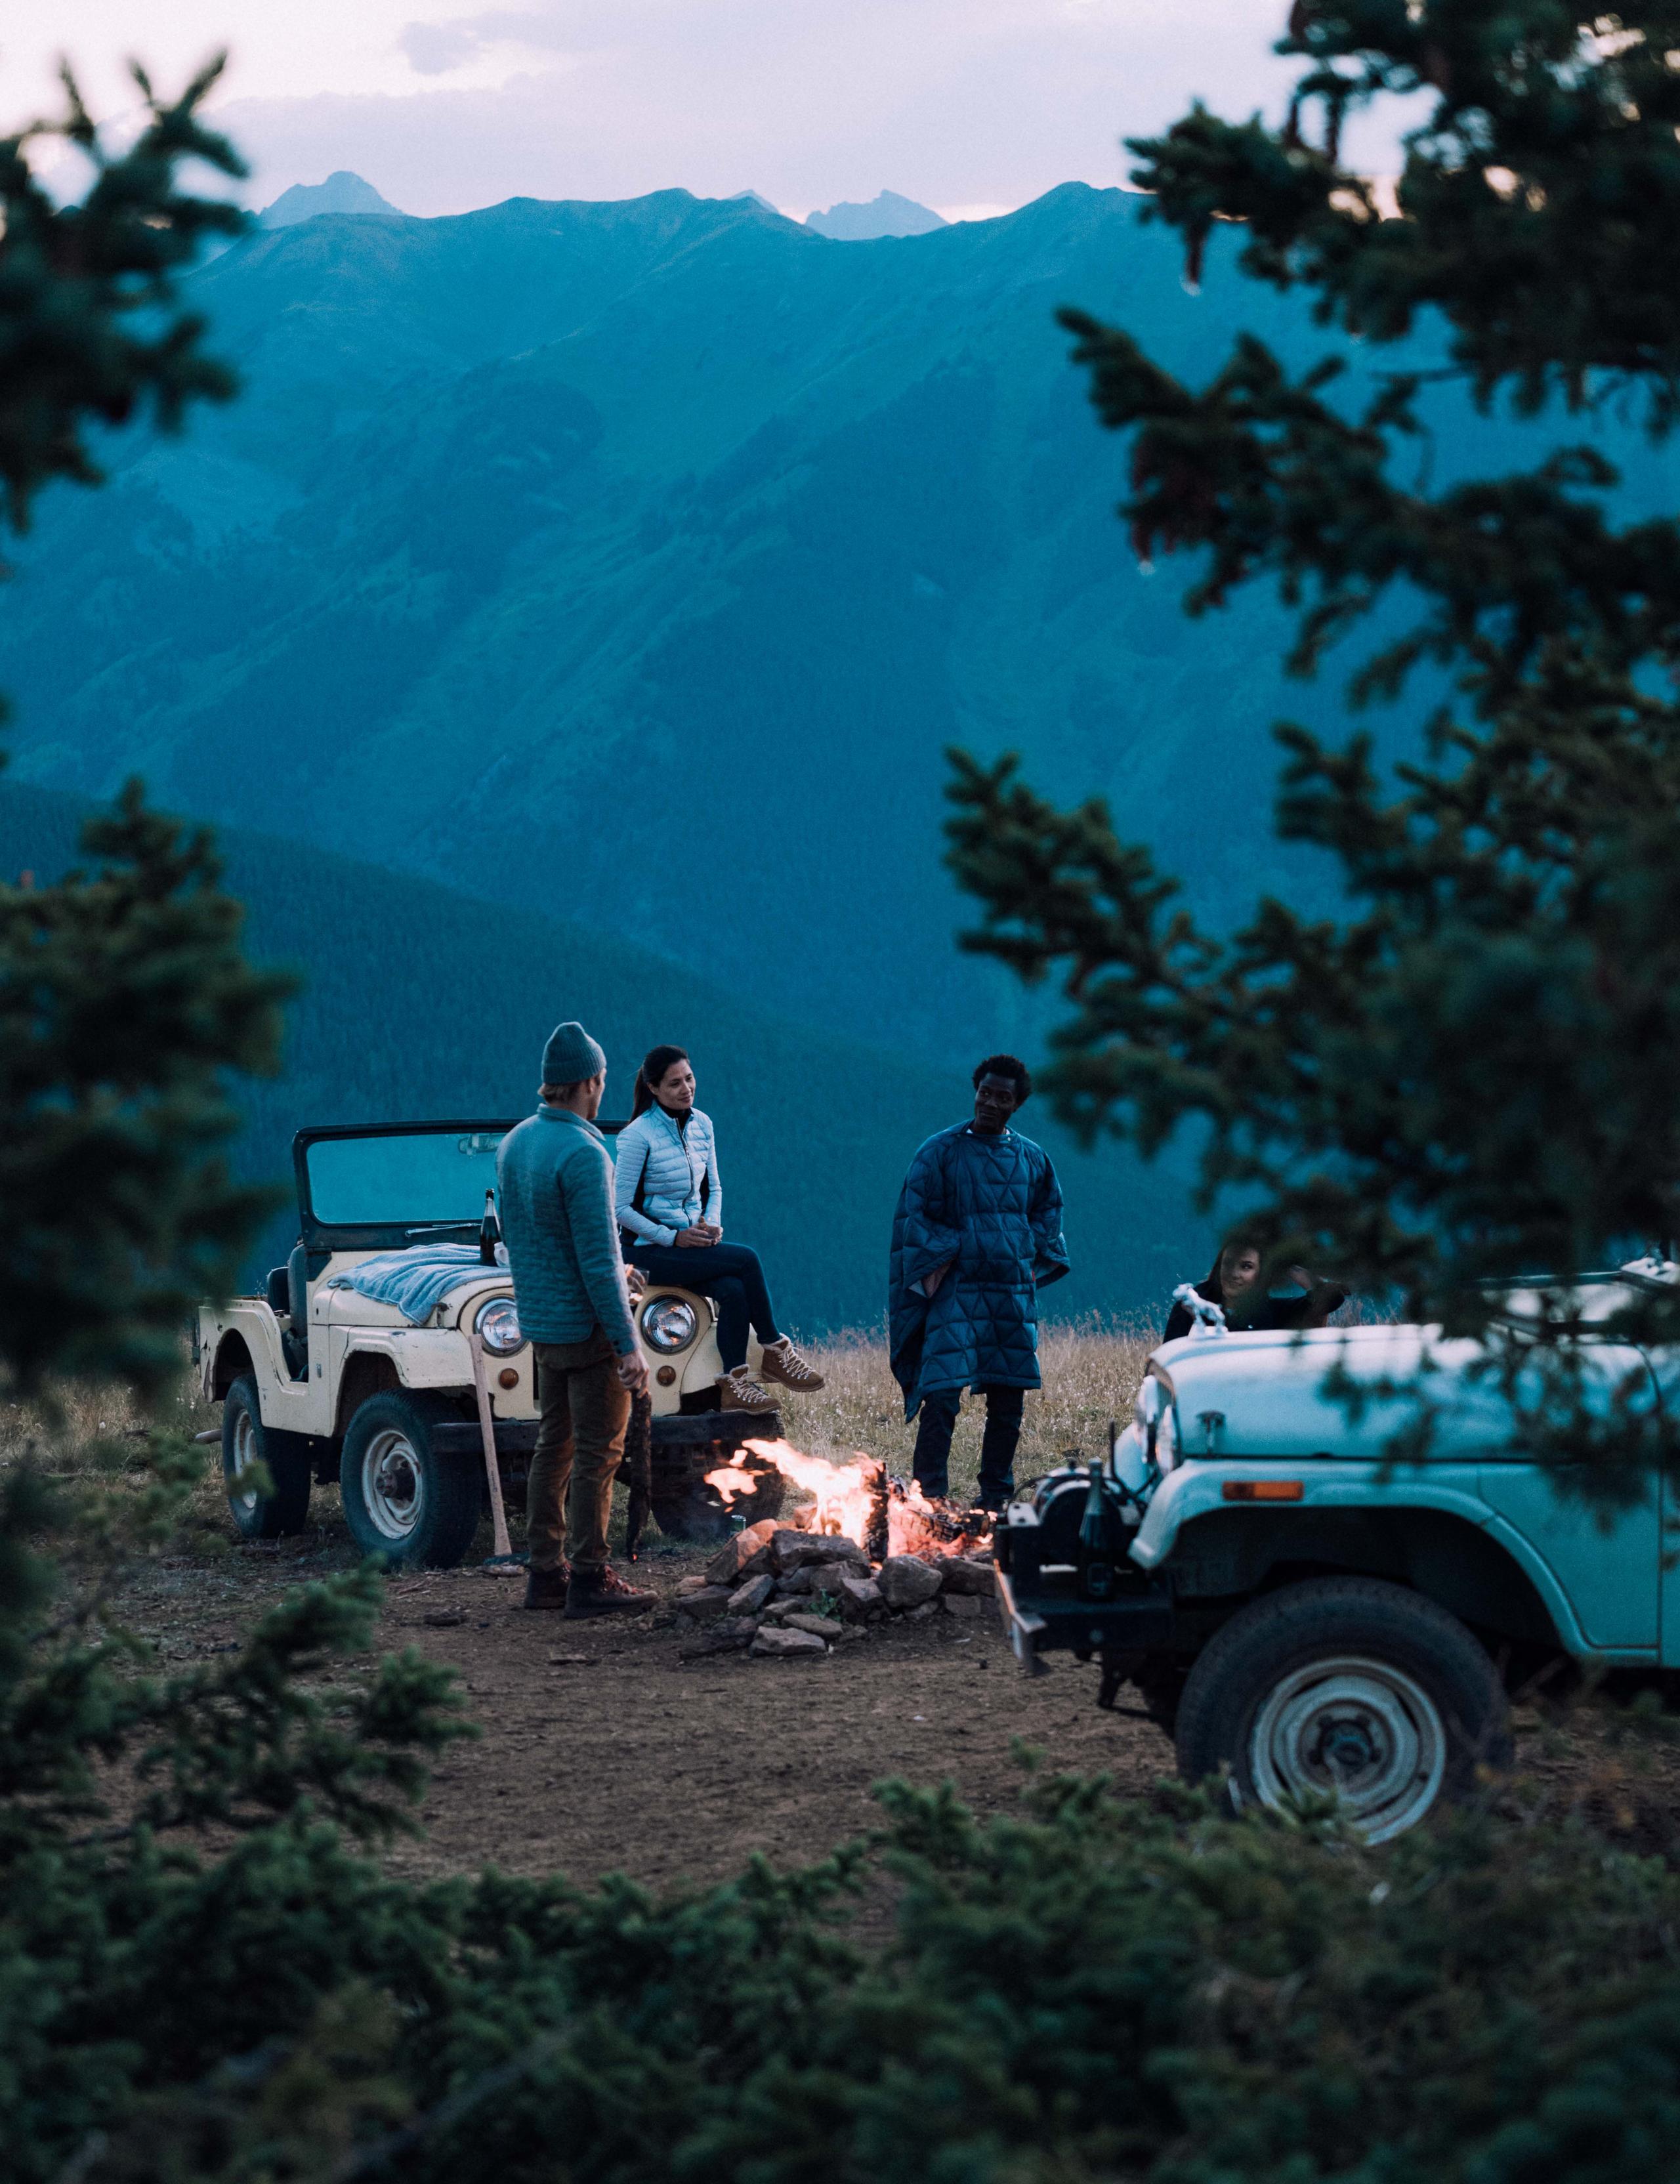 Two men and one woman tending to a fire at dusk next to two vintage Jeeps on mountain in Aspen